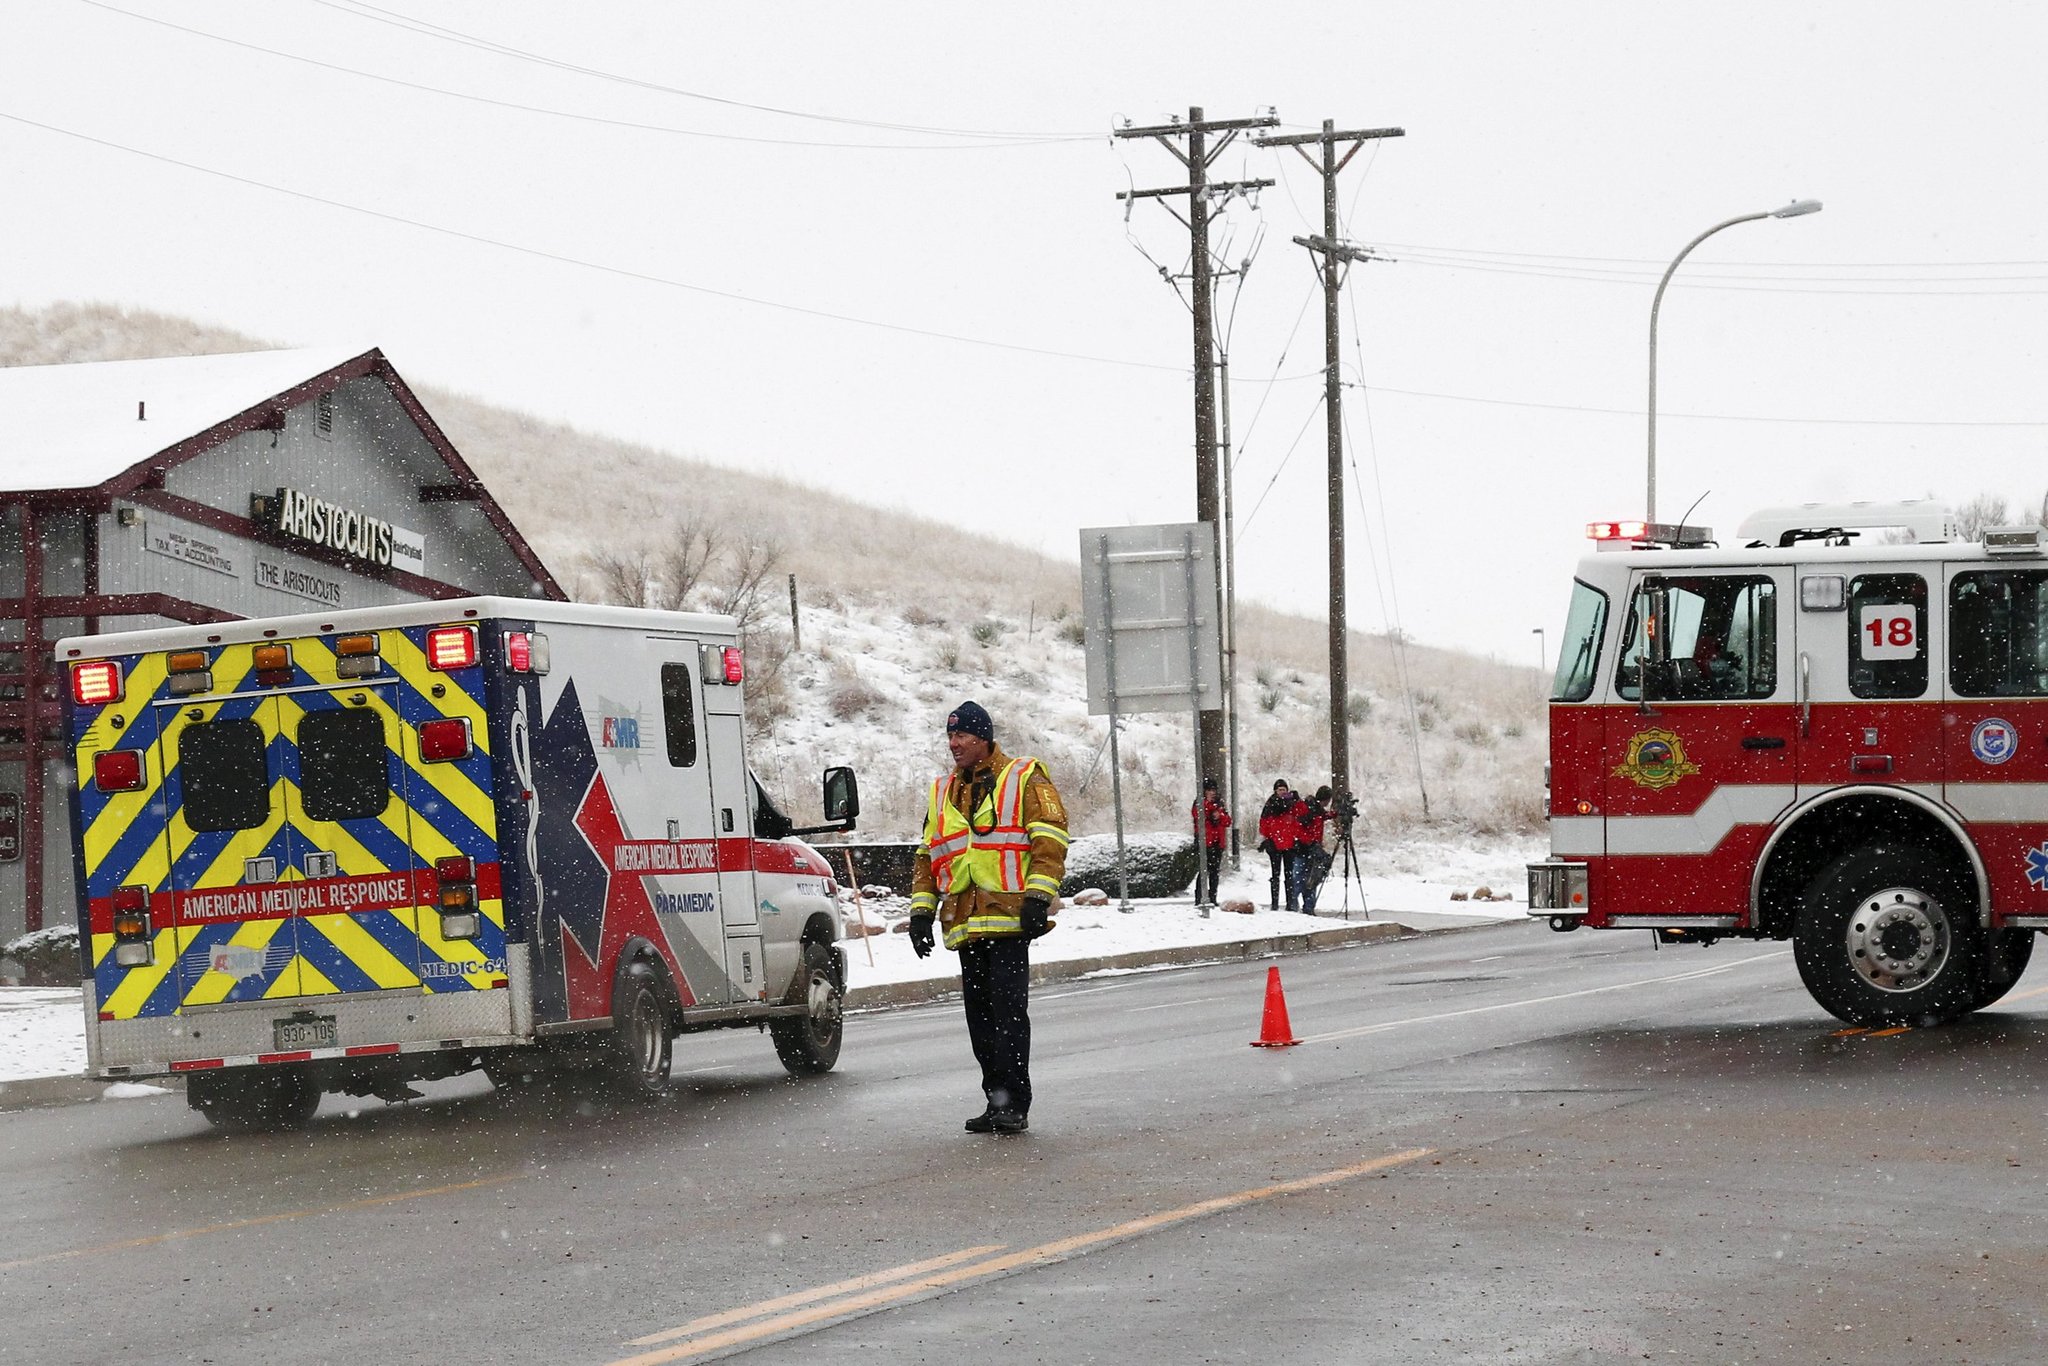 An ambulance en route to a Planned Parenthood clinic in Colorado Springs on Friday. [Reuters]